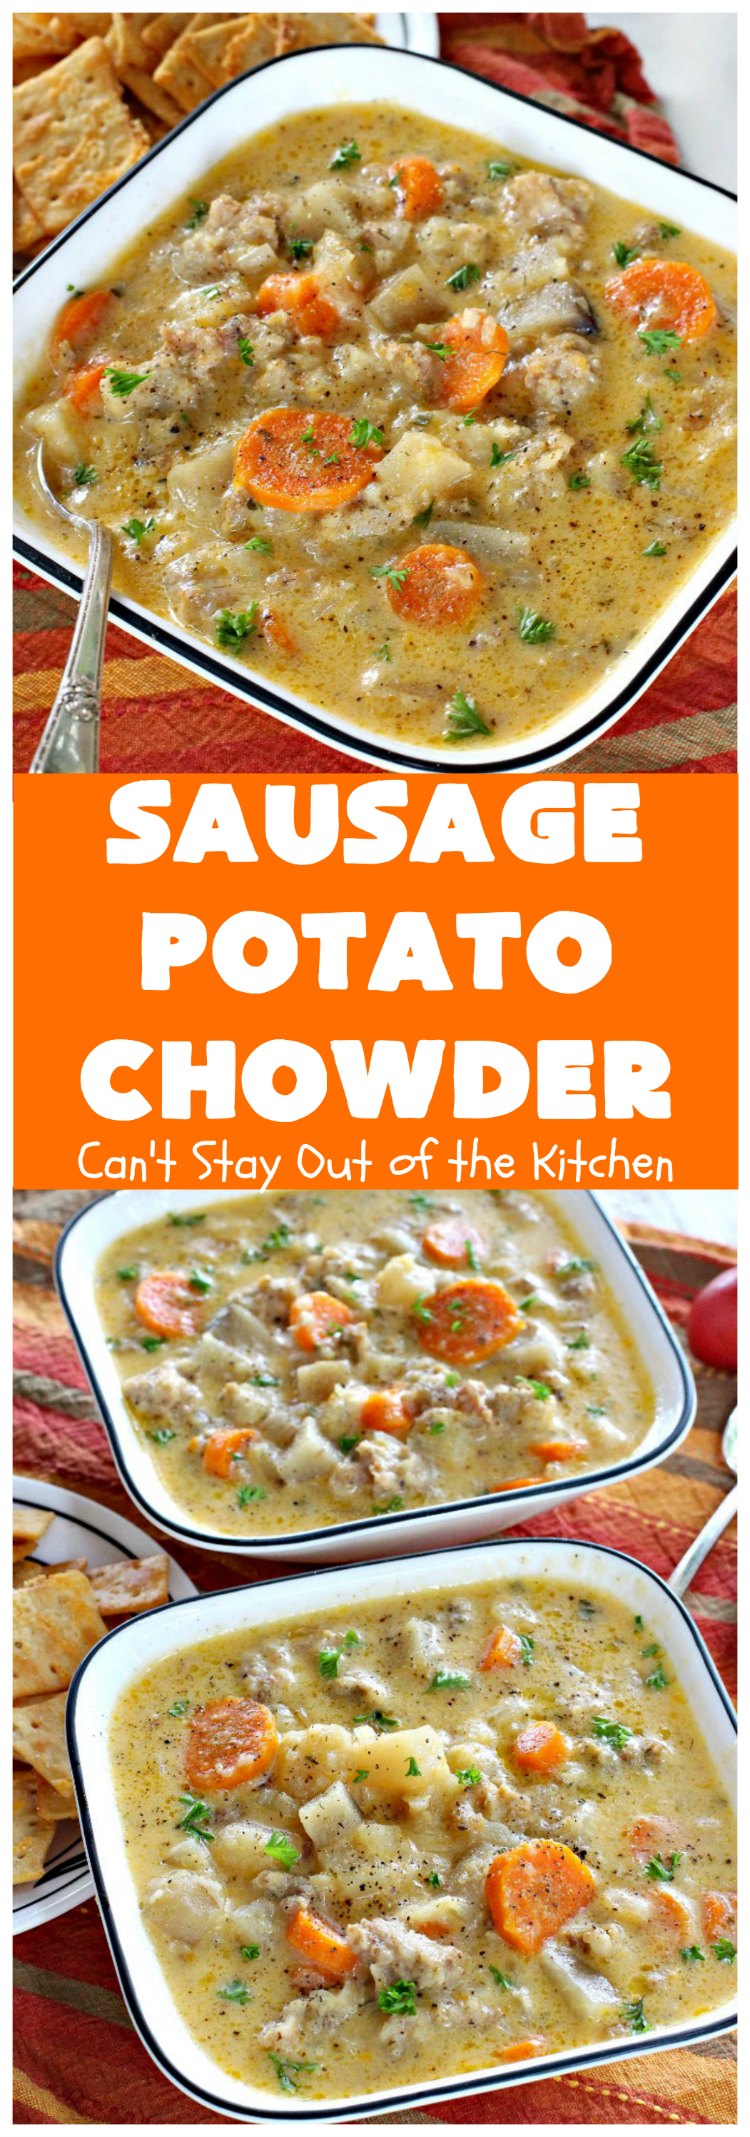 Sausage Potato Chowder | Can't Stay Out of the Kitchen